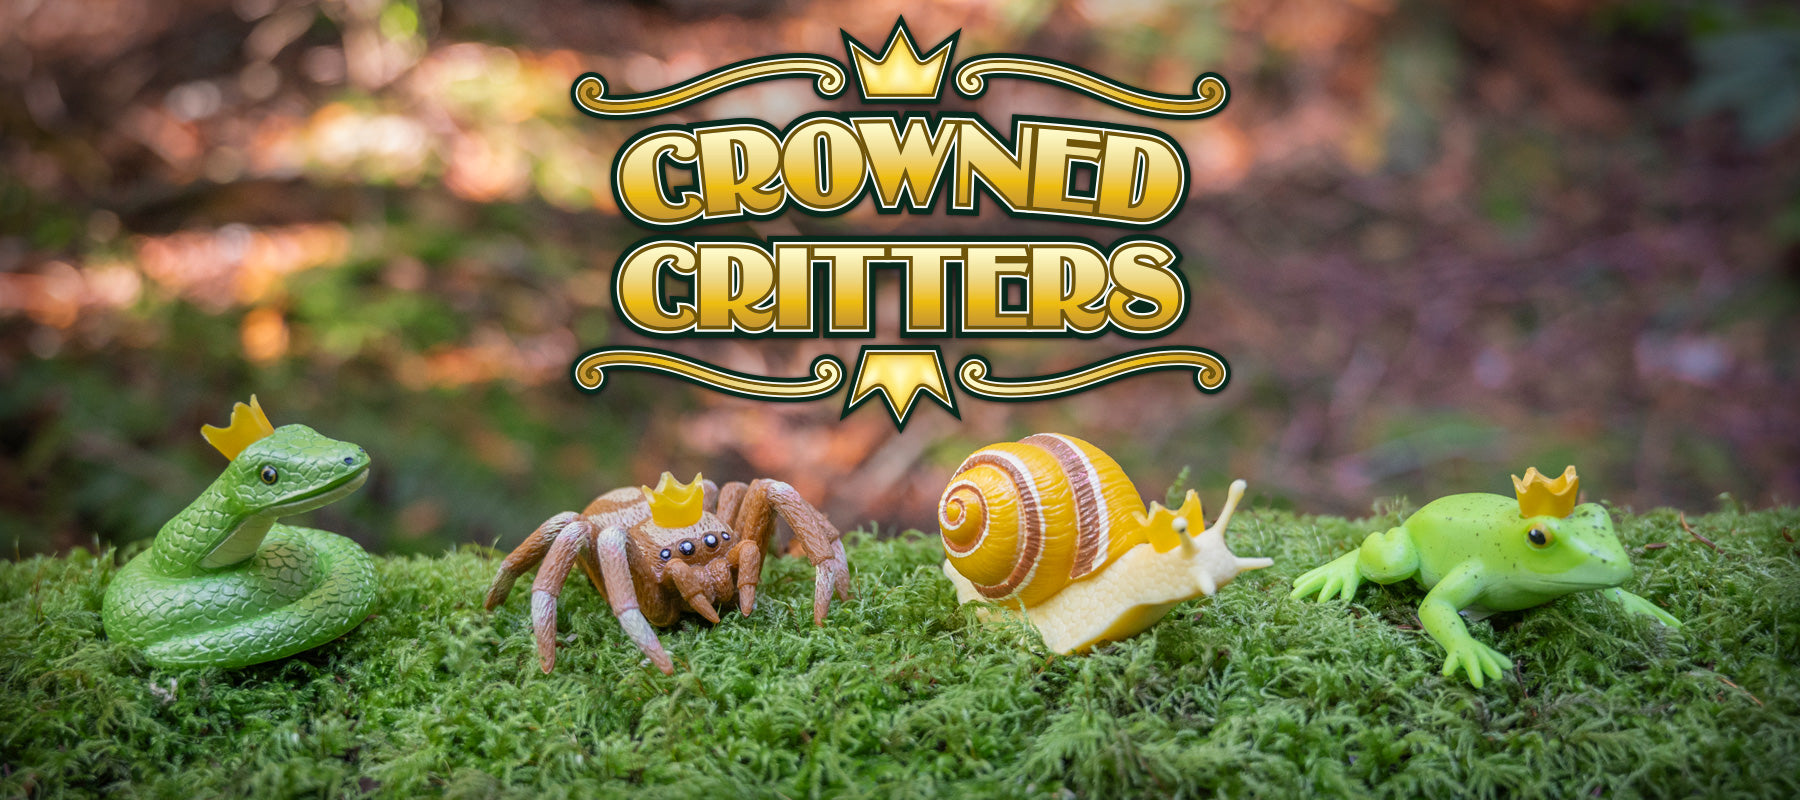 Crowned Critters